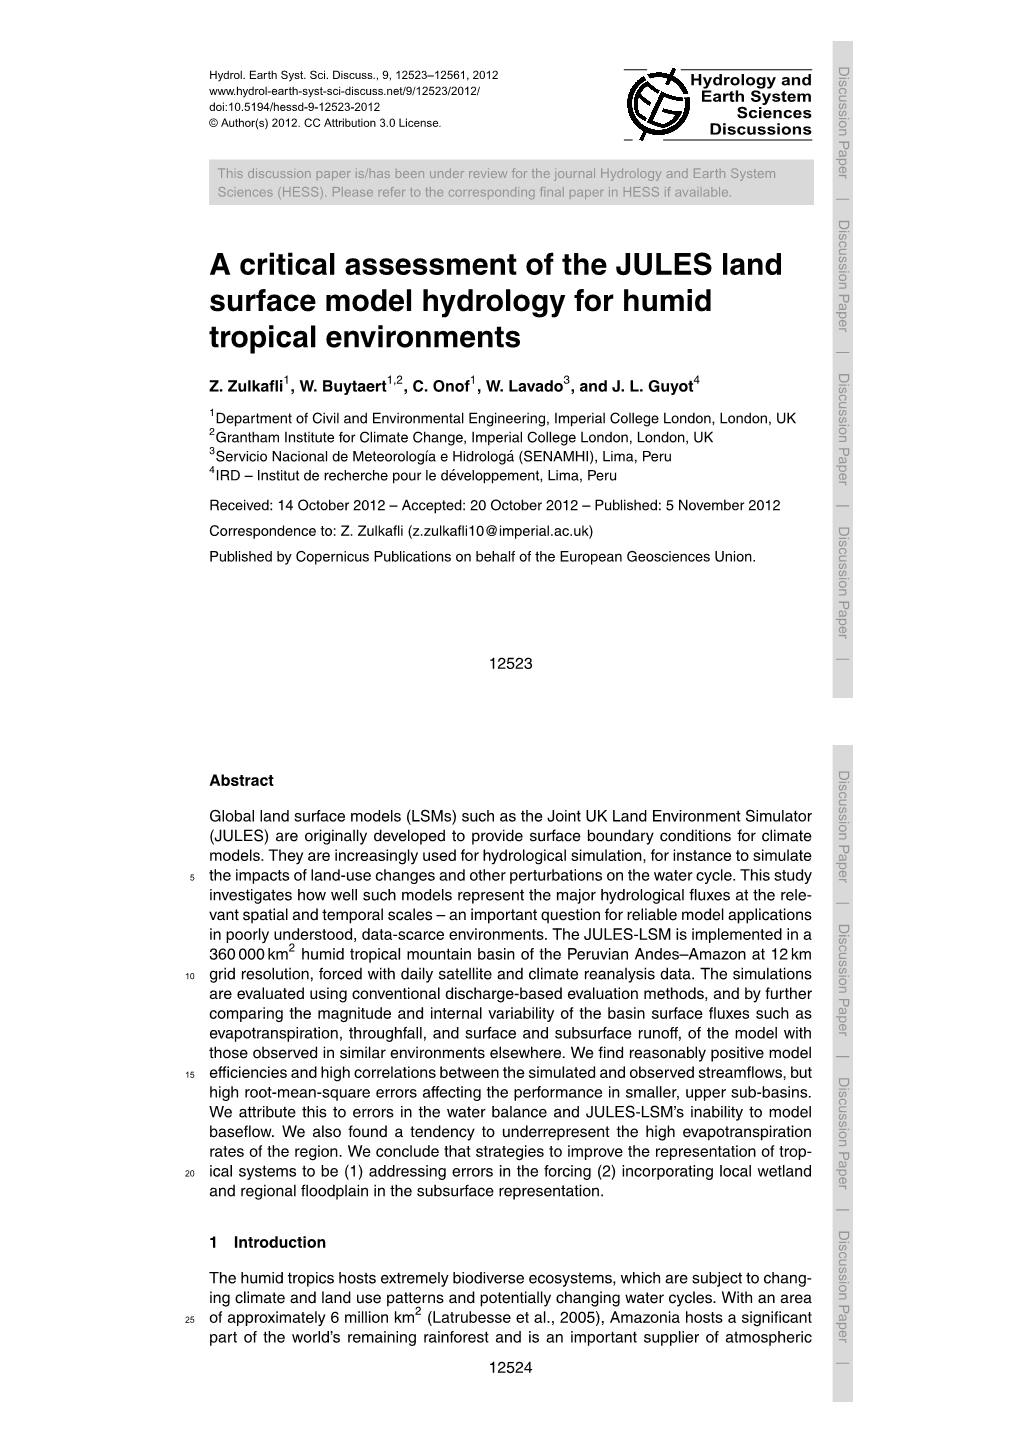 A Critical Assessment of the JULES Land Surface Model Hydrology For